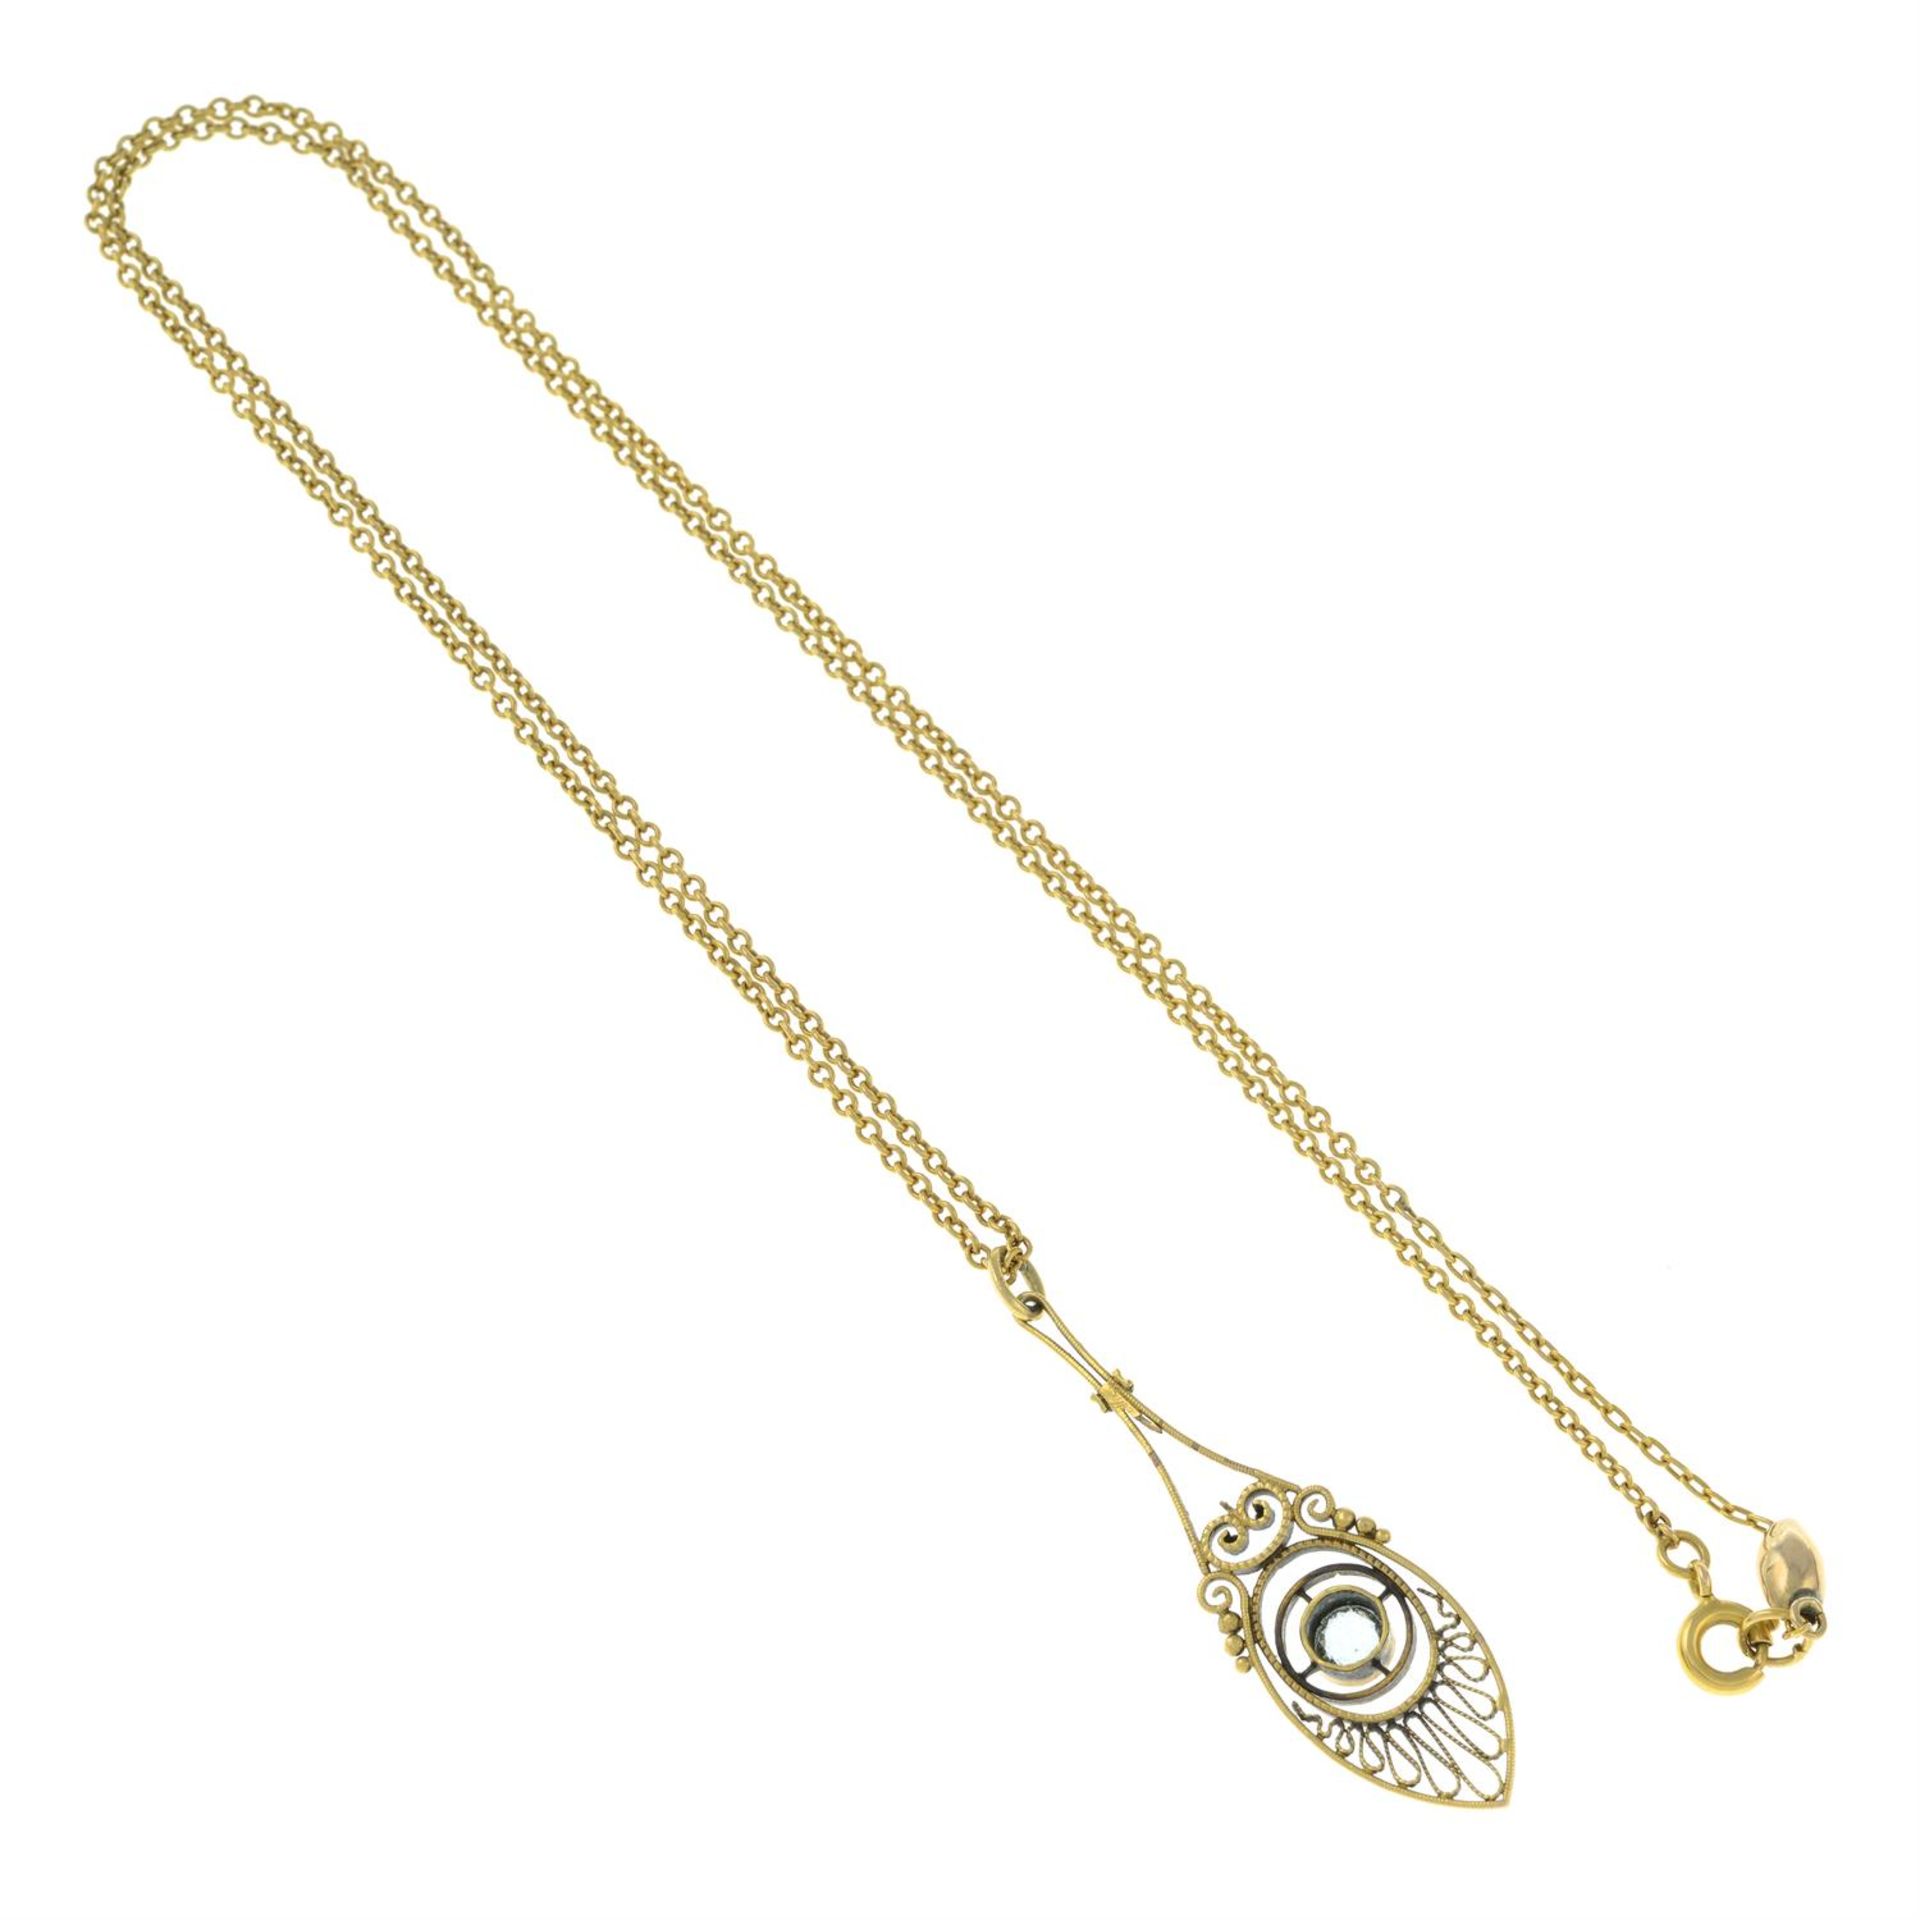 A 19th century gold aquamarine cannetille pendant, with chain. - Image 2 of 2